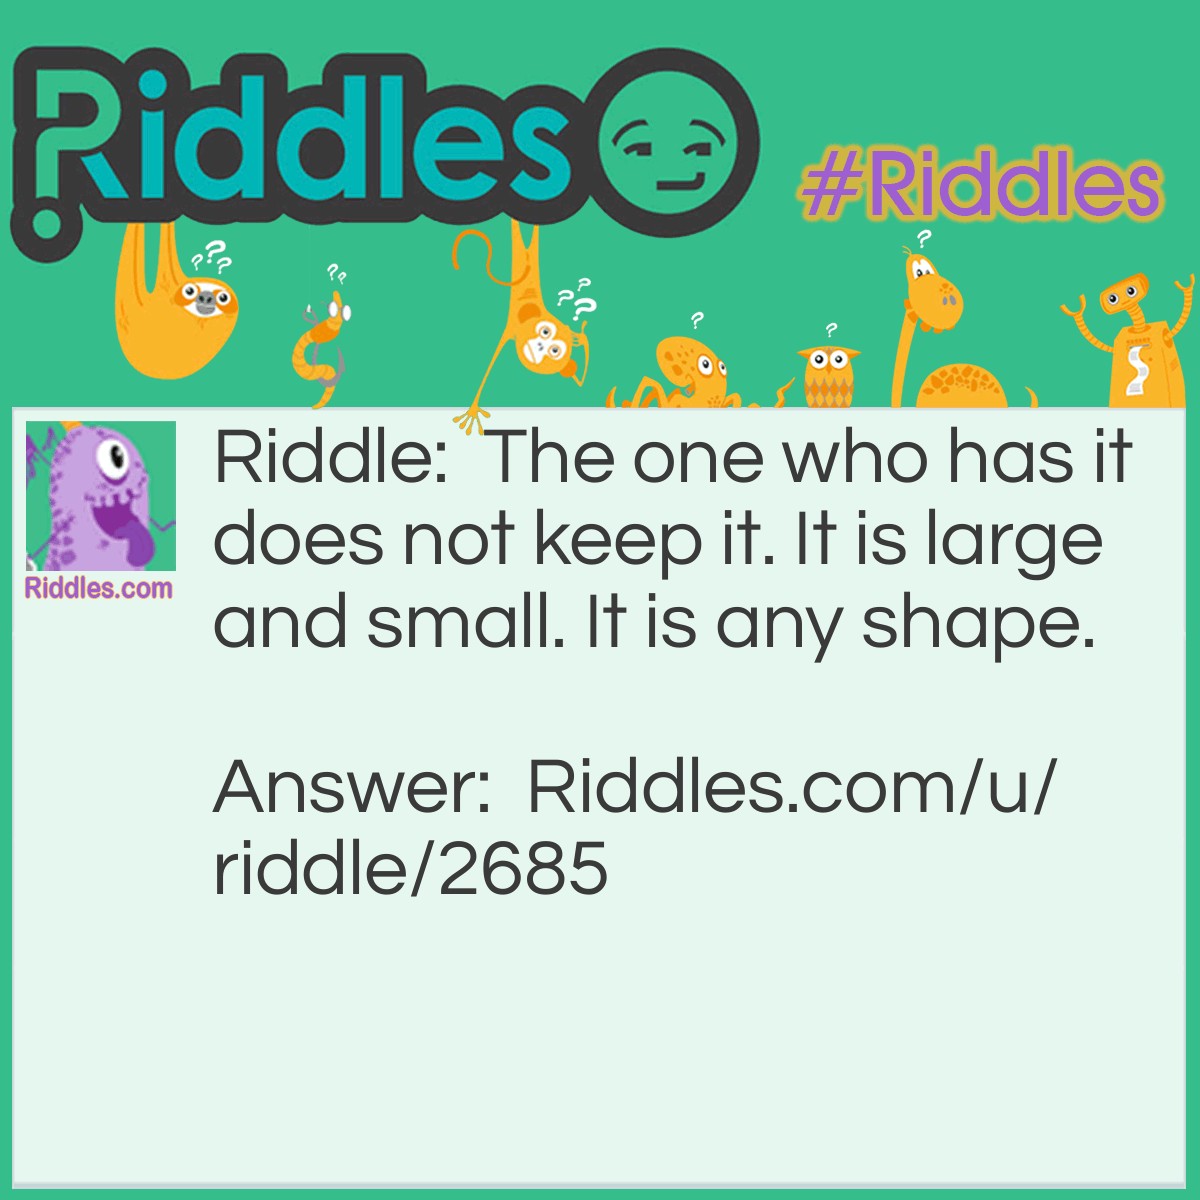 Riddle: The one who has it does not keep it. It is large and small. It is any shape. Answer: A gift.